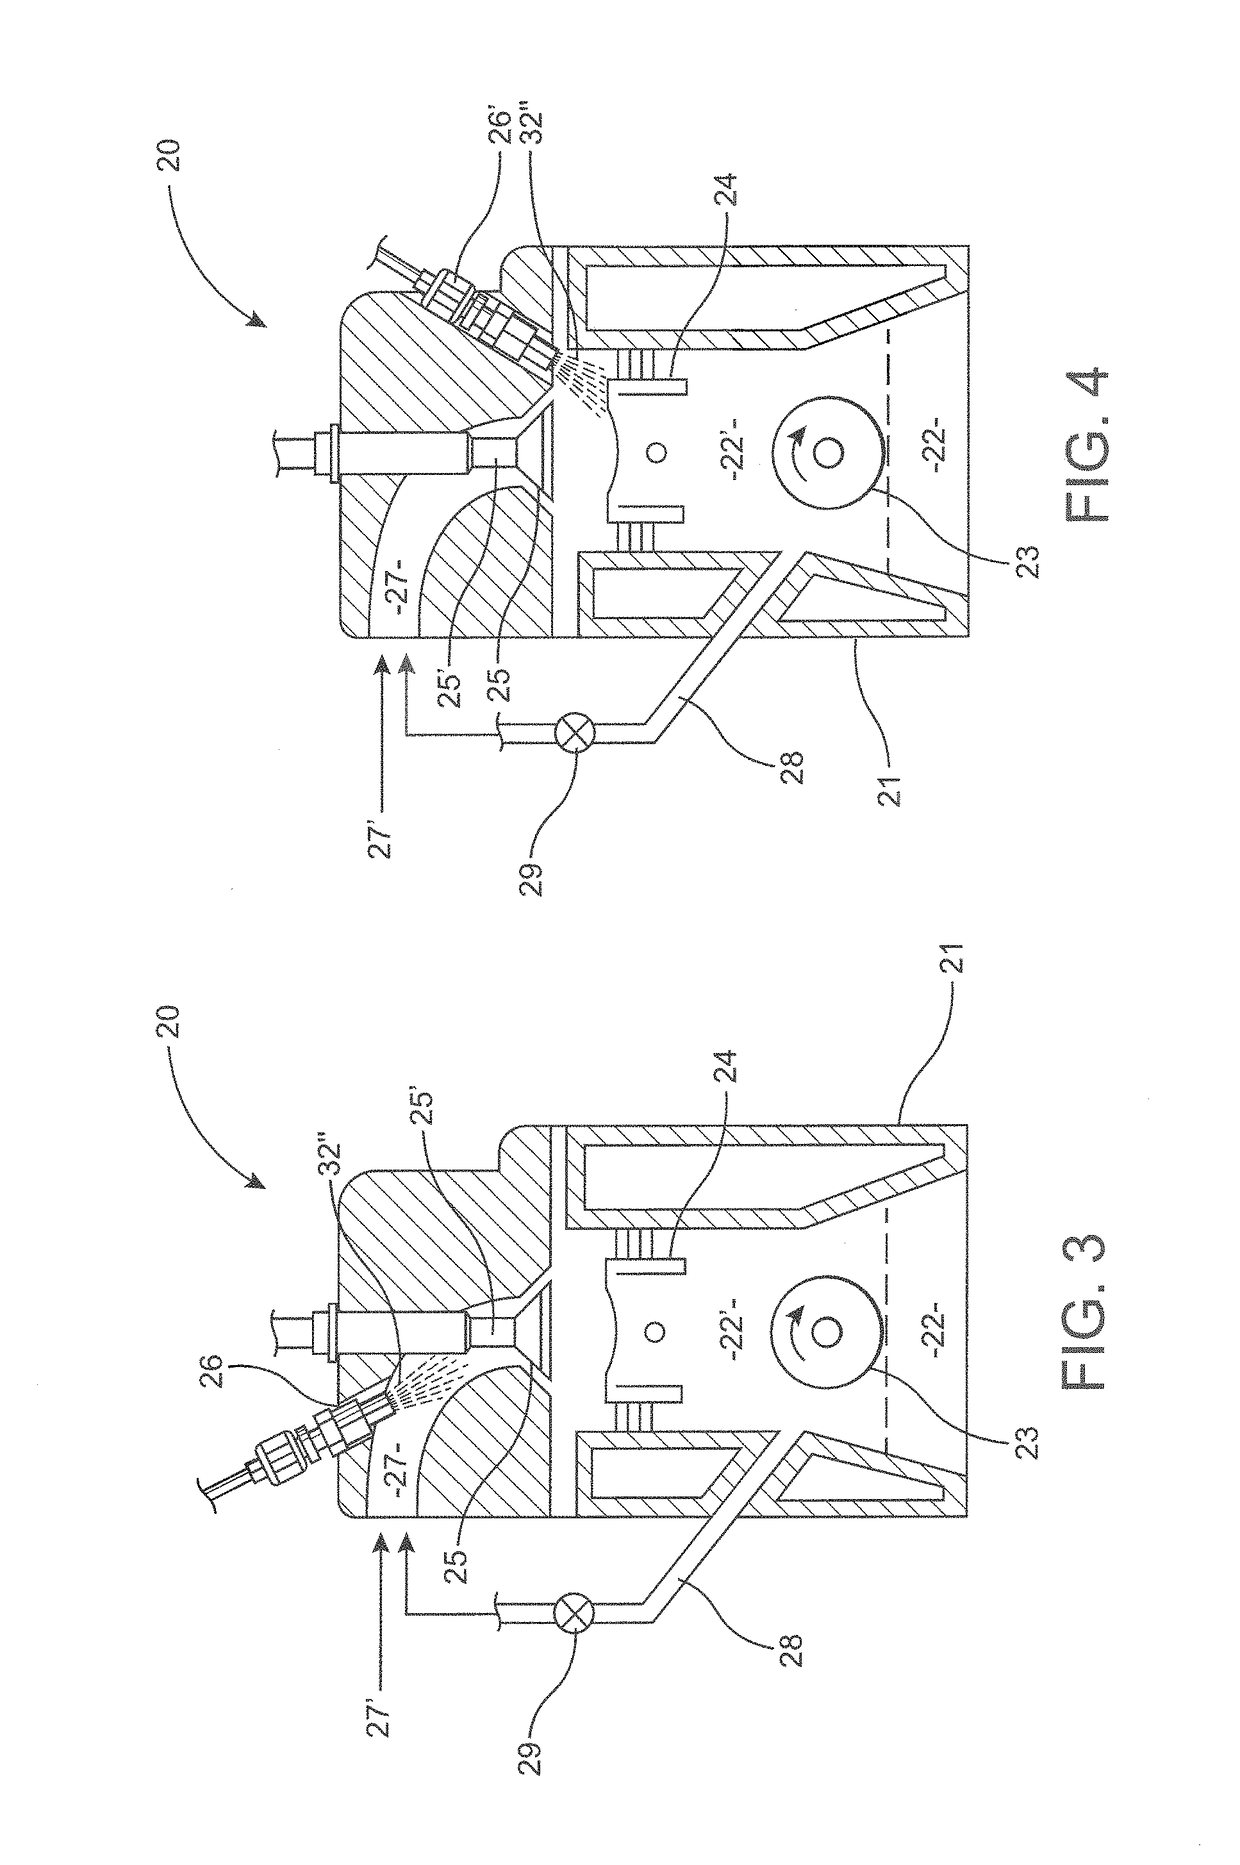 Positive crankcase ventilation gas diversion and reclamation system